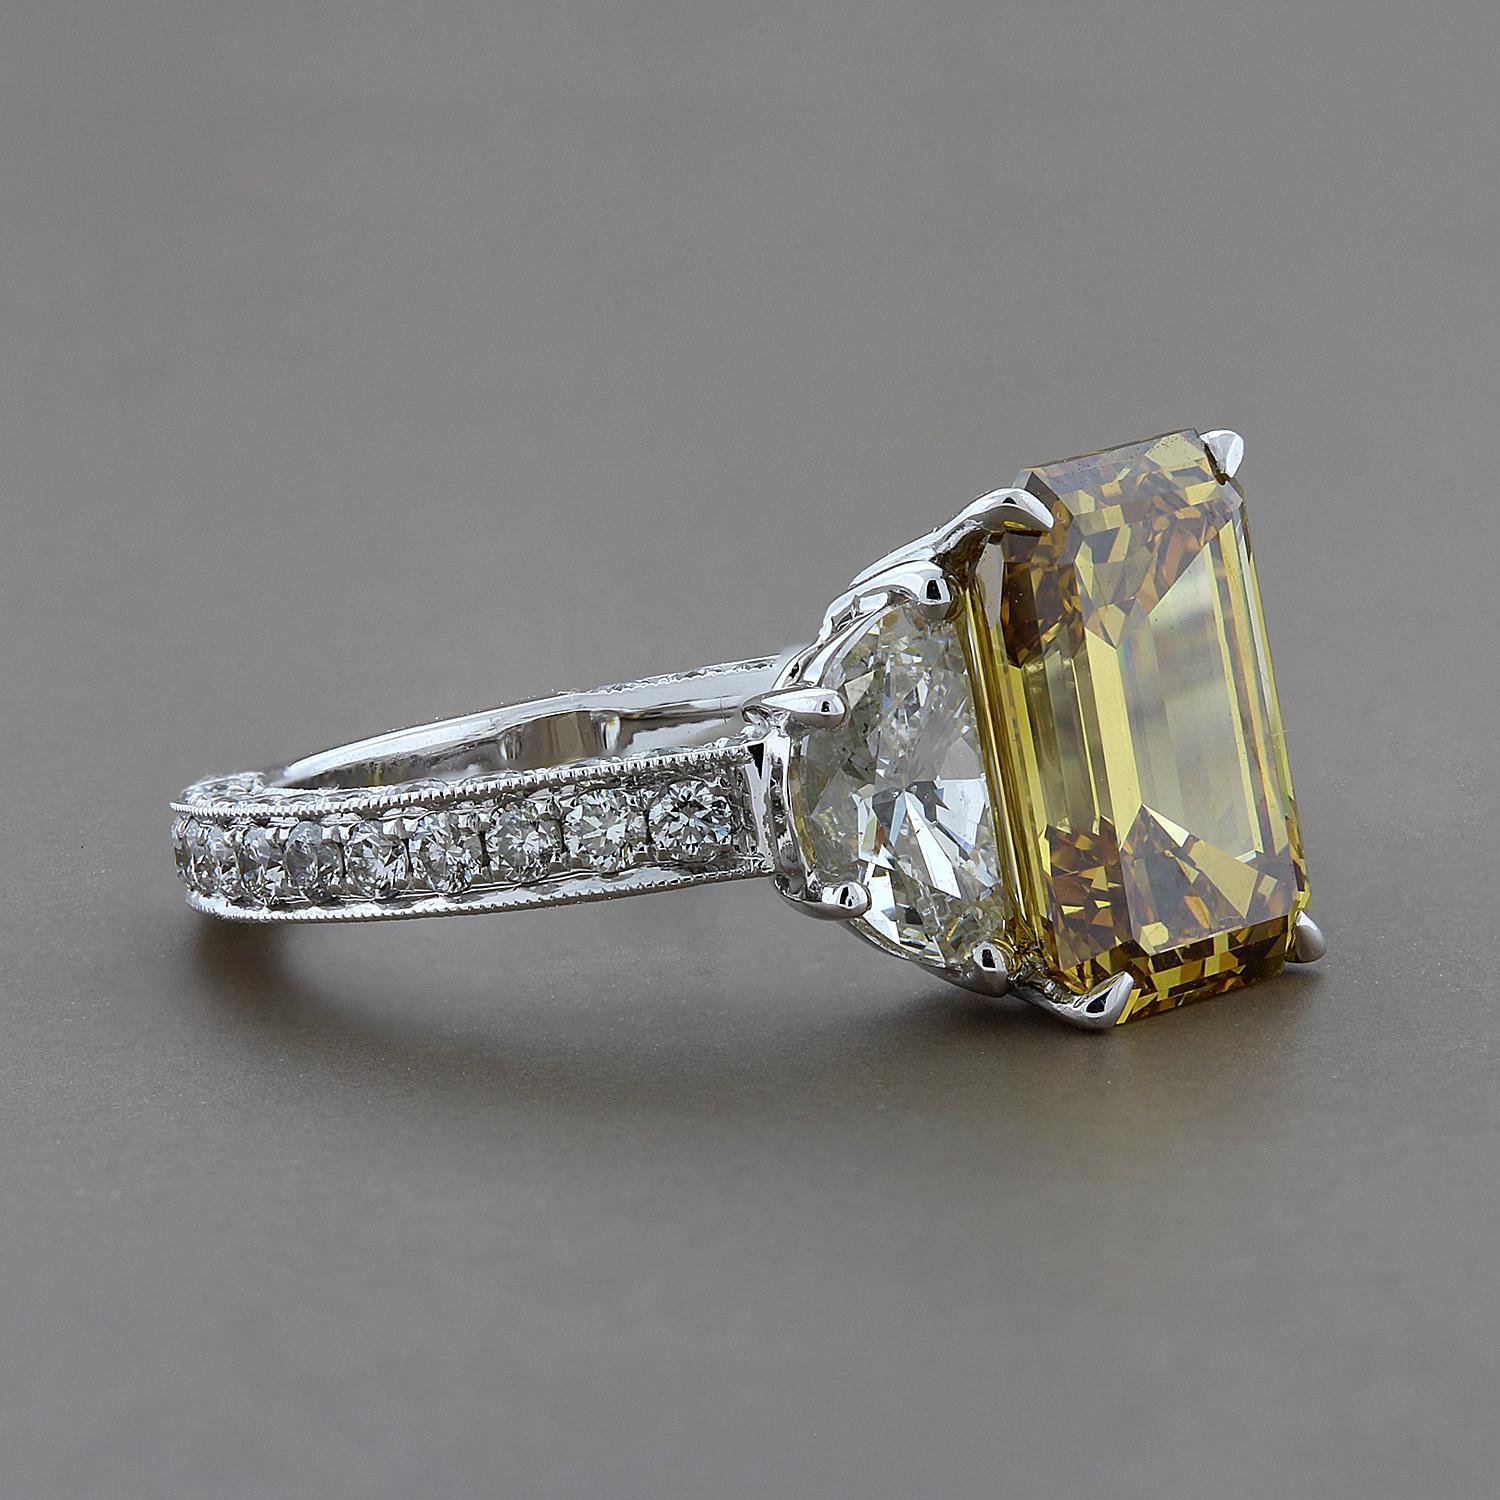 4.21 carat fancy deep brownish yellow emerald cut diamond.  A truly gorgeous and deep color that is hard to find in a diamond.  GIA states the VVS2 clarity diamond has been processed by high pressure/high temperature.  Two brilliant VS clarity half